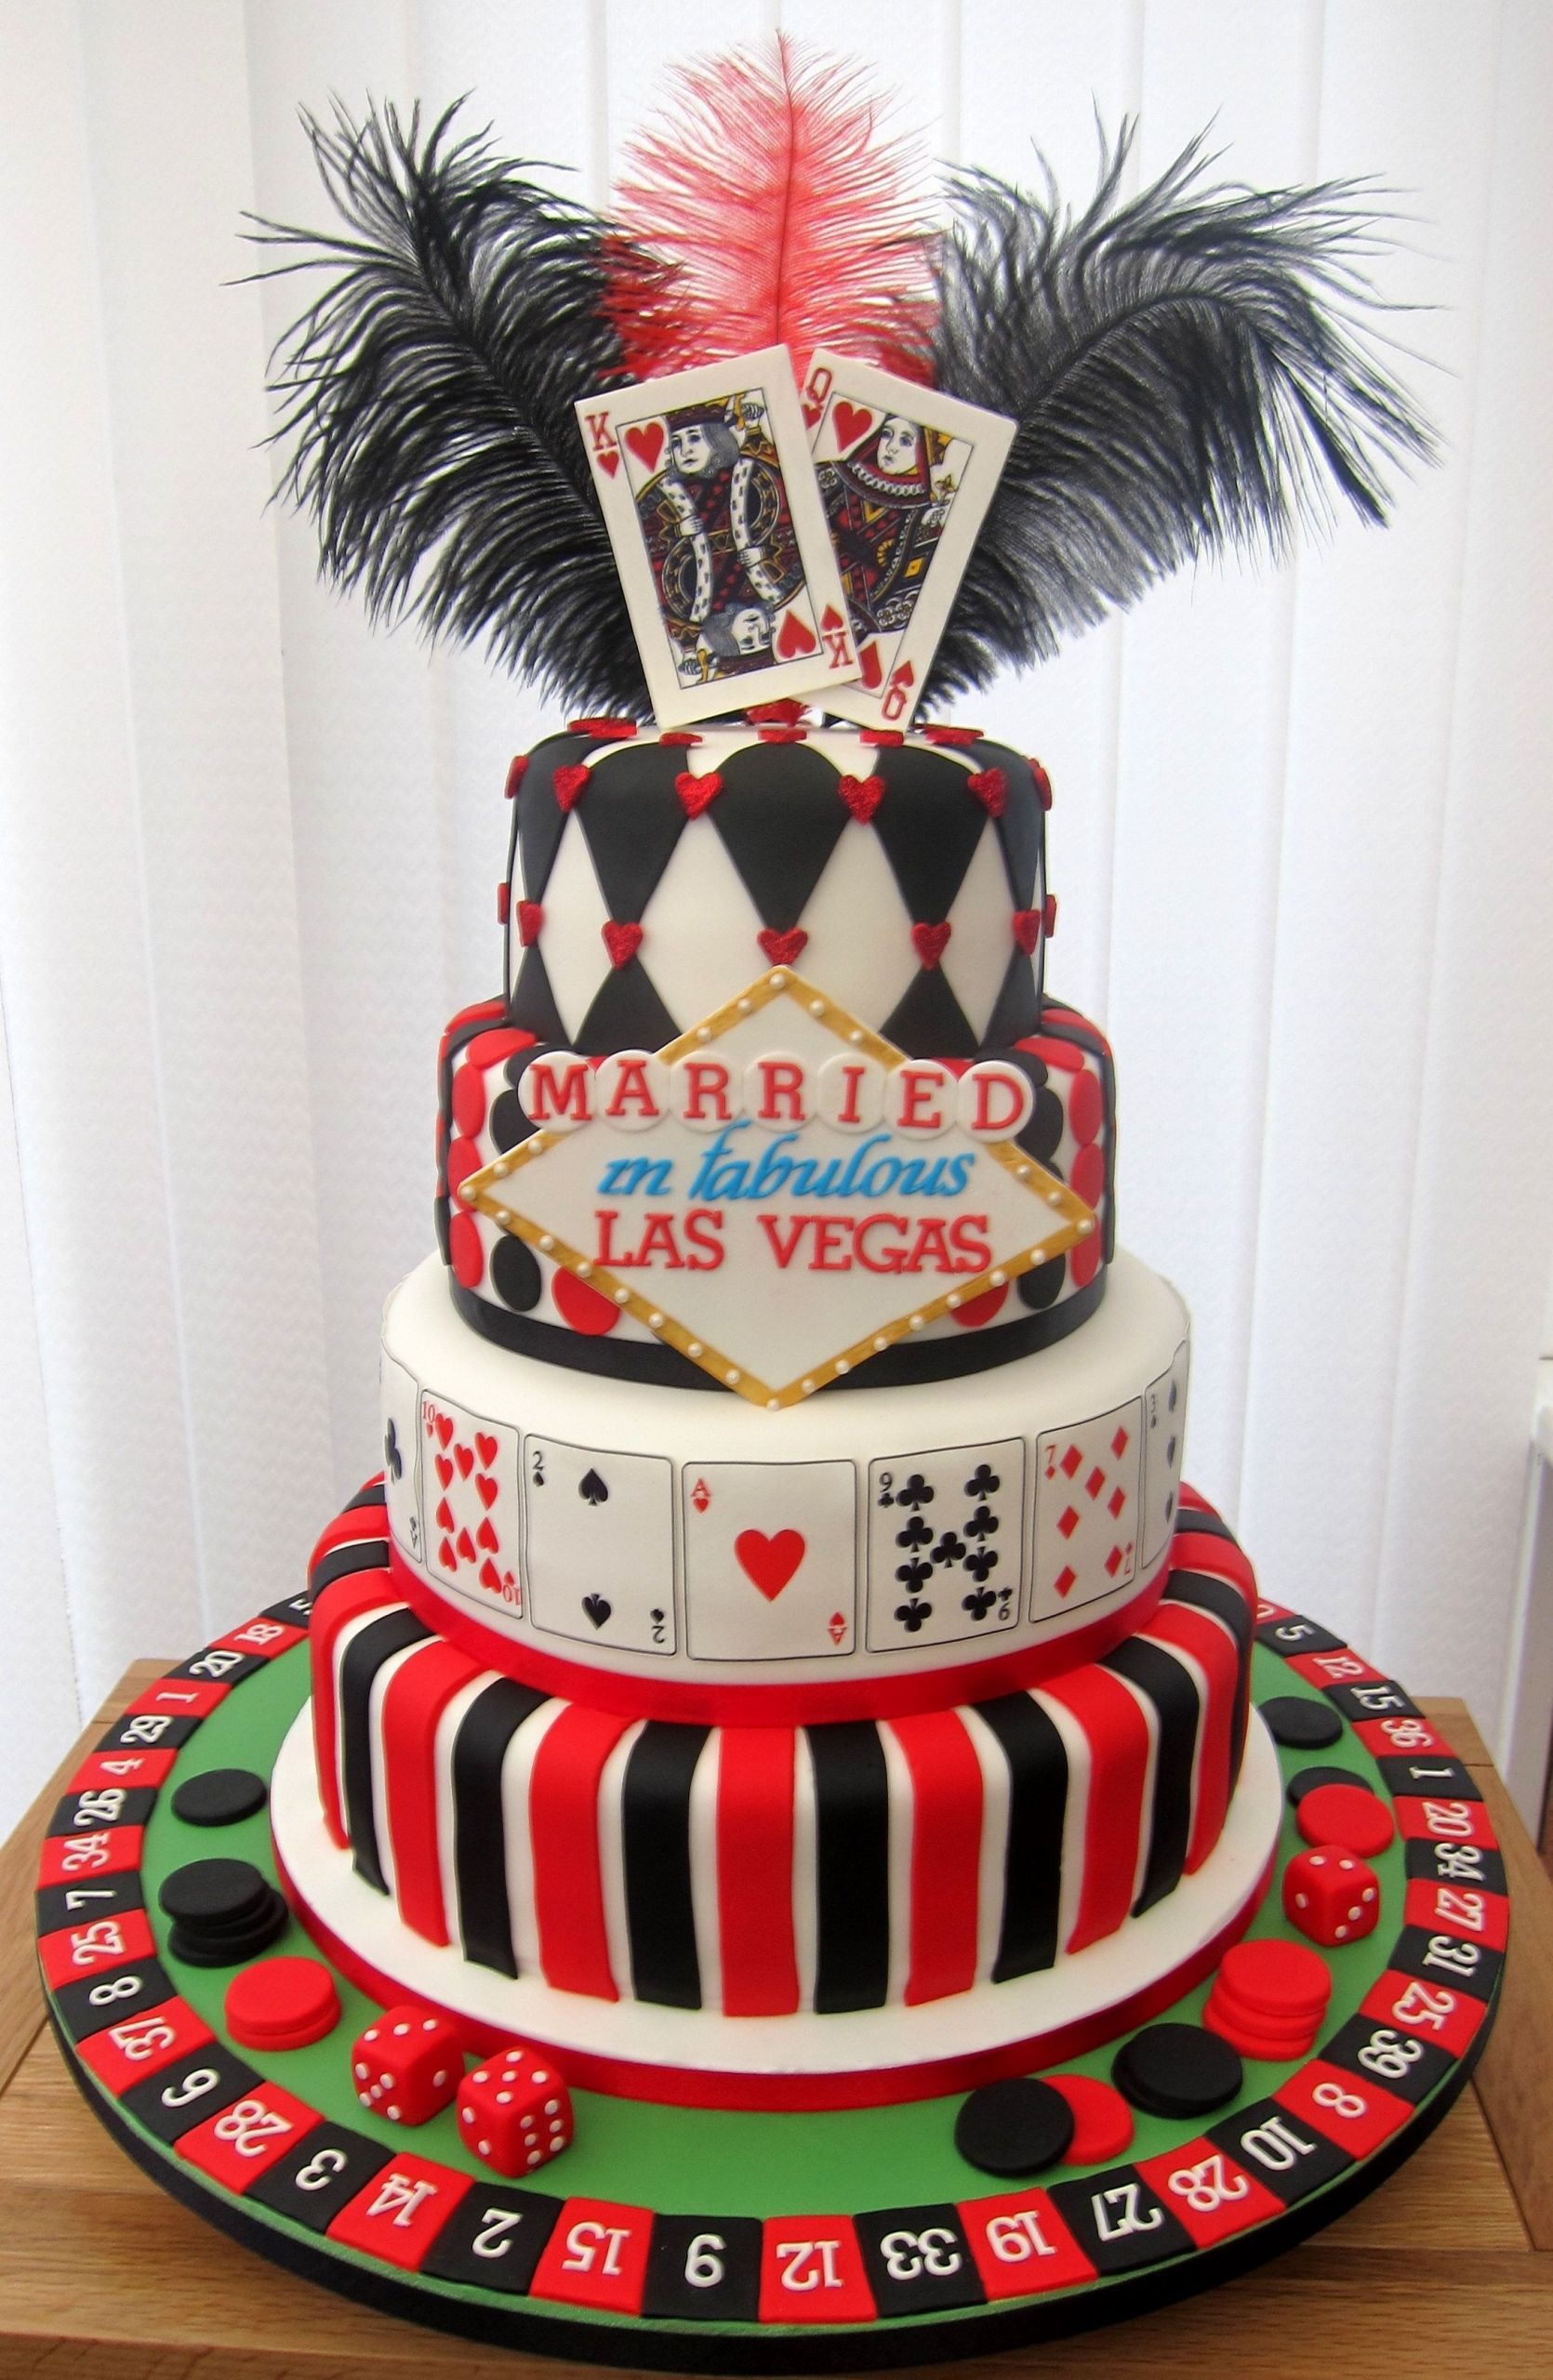 Las Vegas Wedding Cakes
 Wedding cake for a couple who were married in vegas and